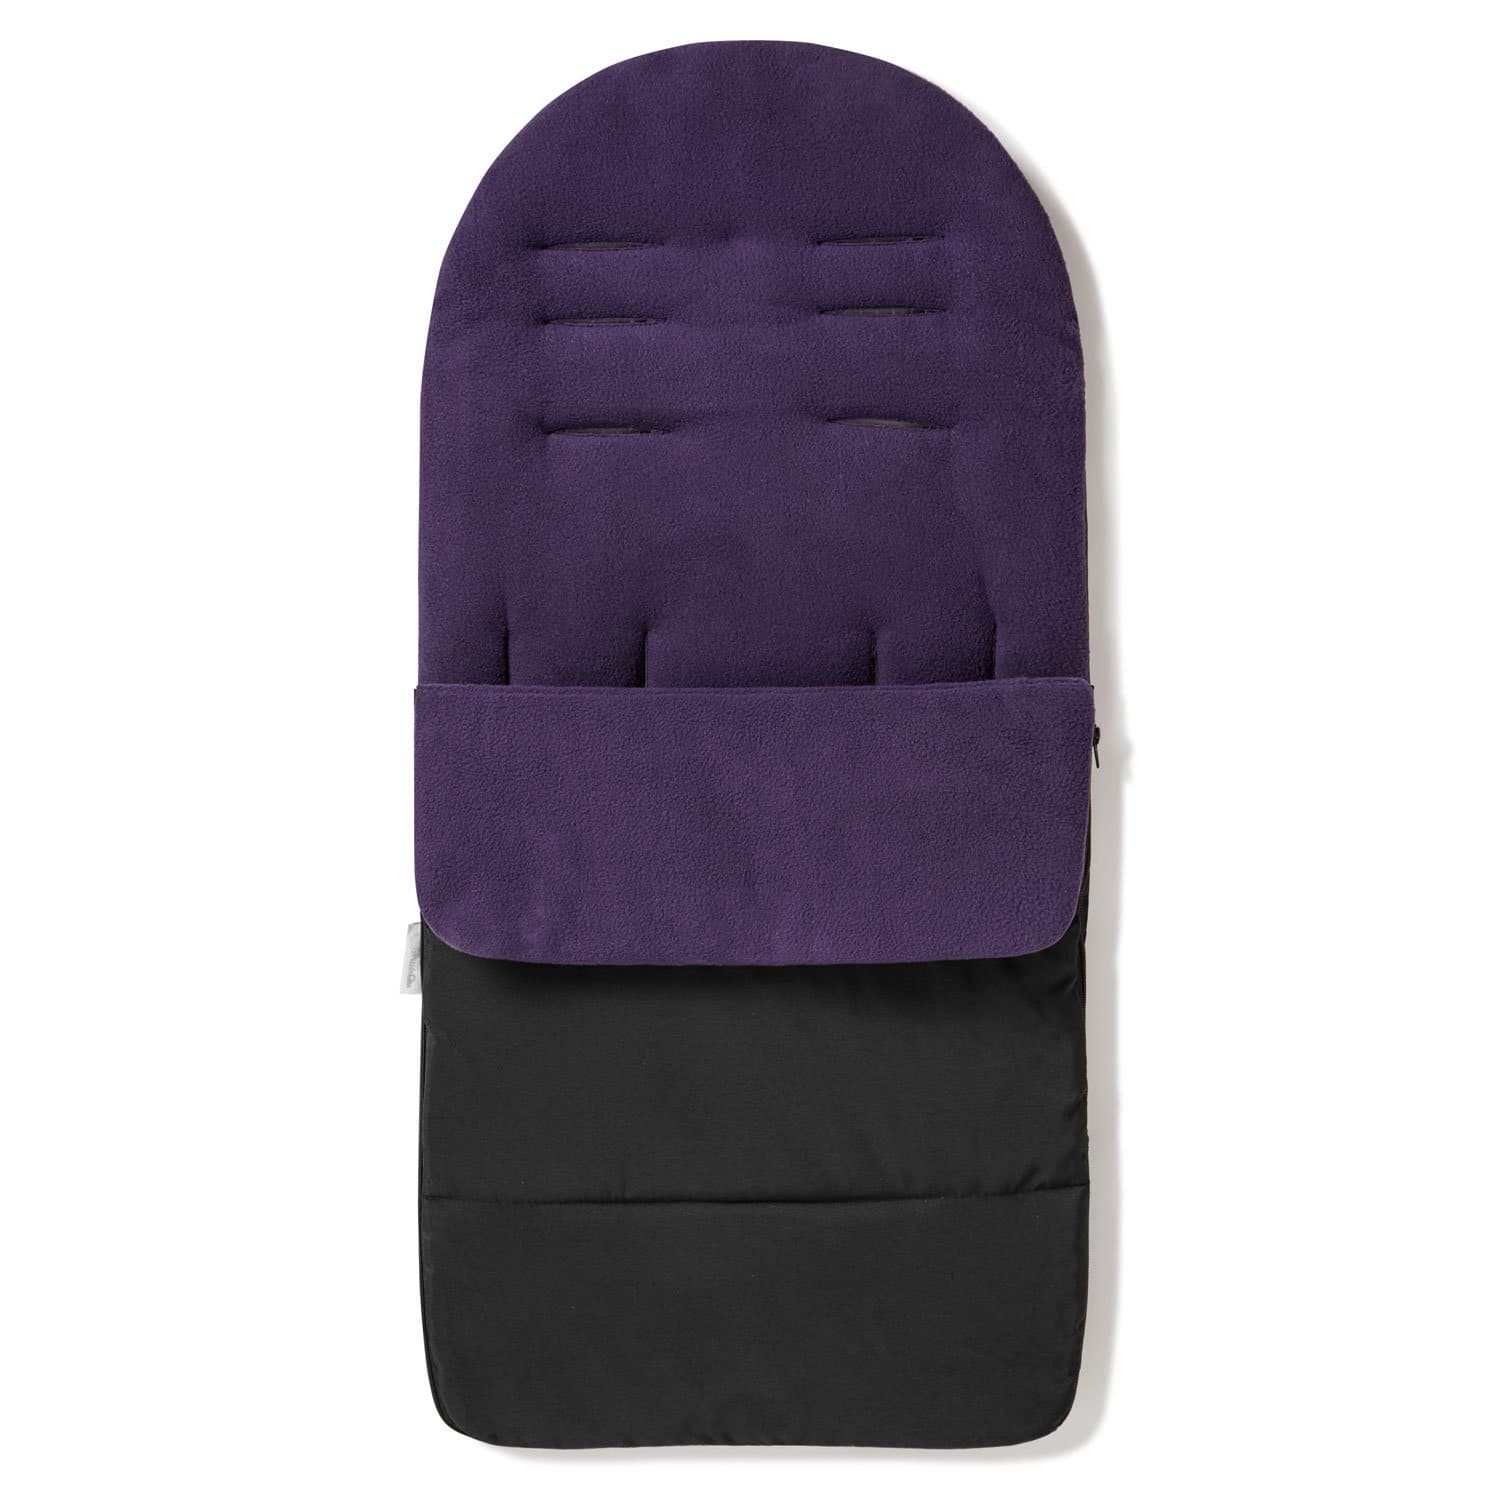 Premium Footmuff / Cosy Toes Compatible with Silver Cross - Plum Purple / Fits All Models | For Your Little One